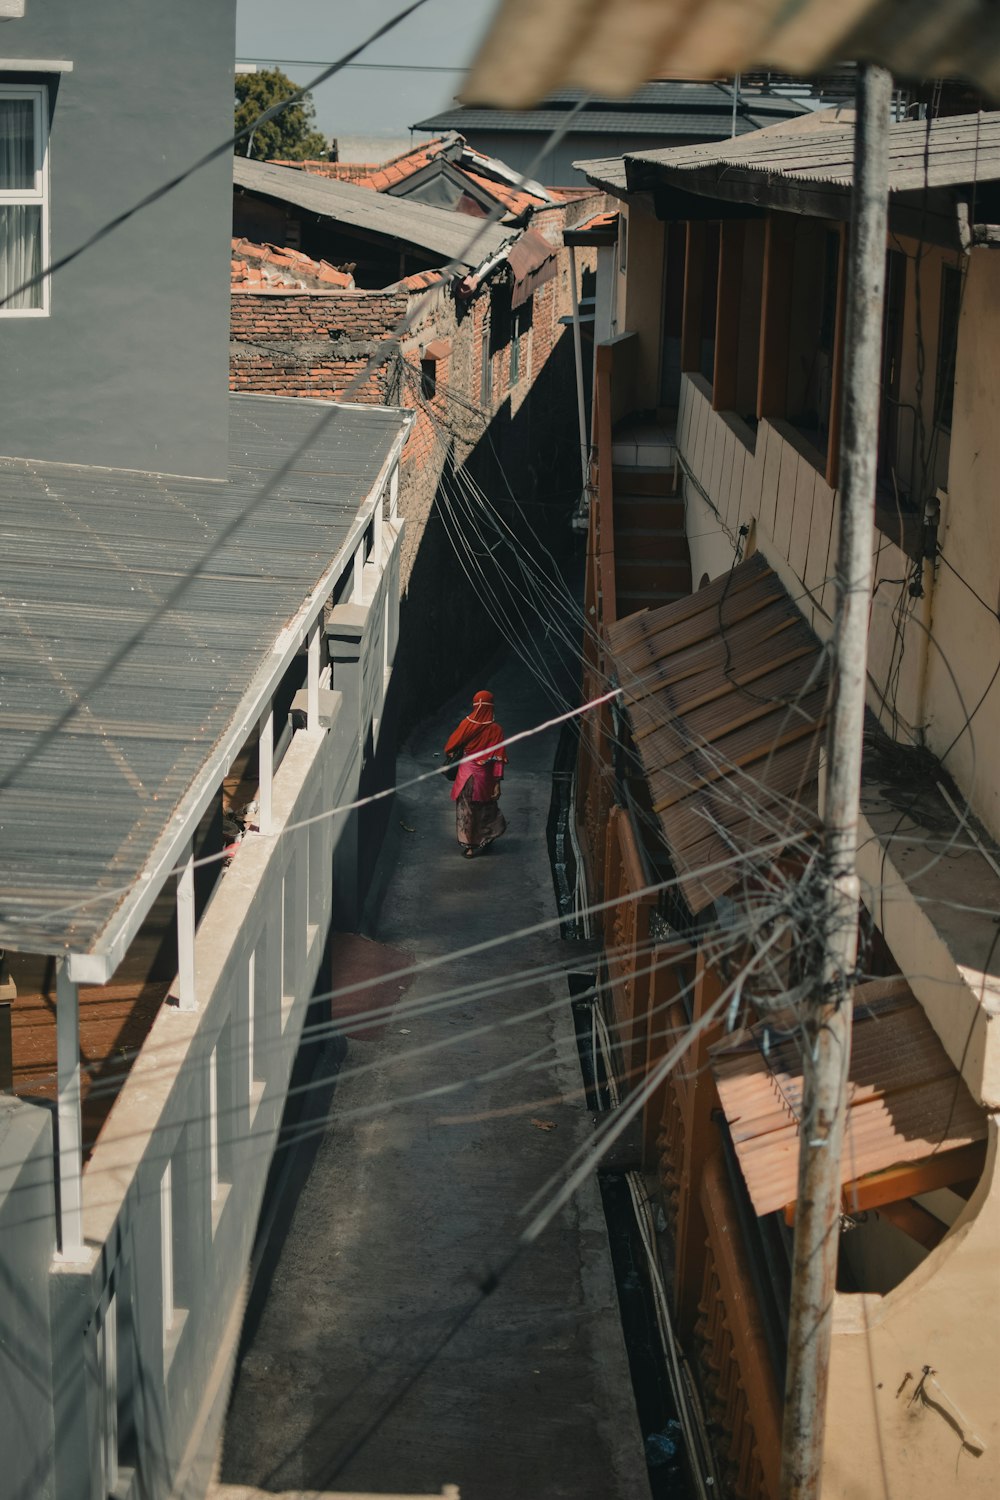 a person walking down a narrow alley way